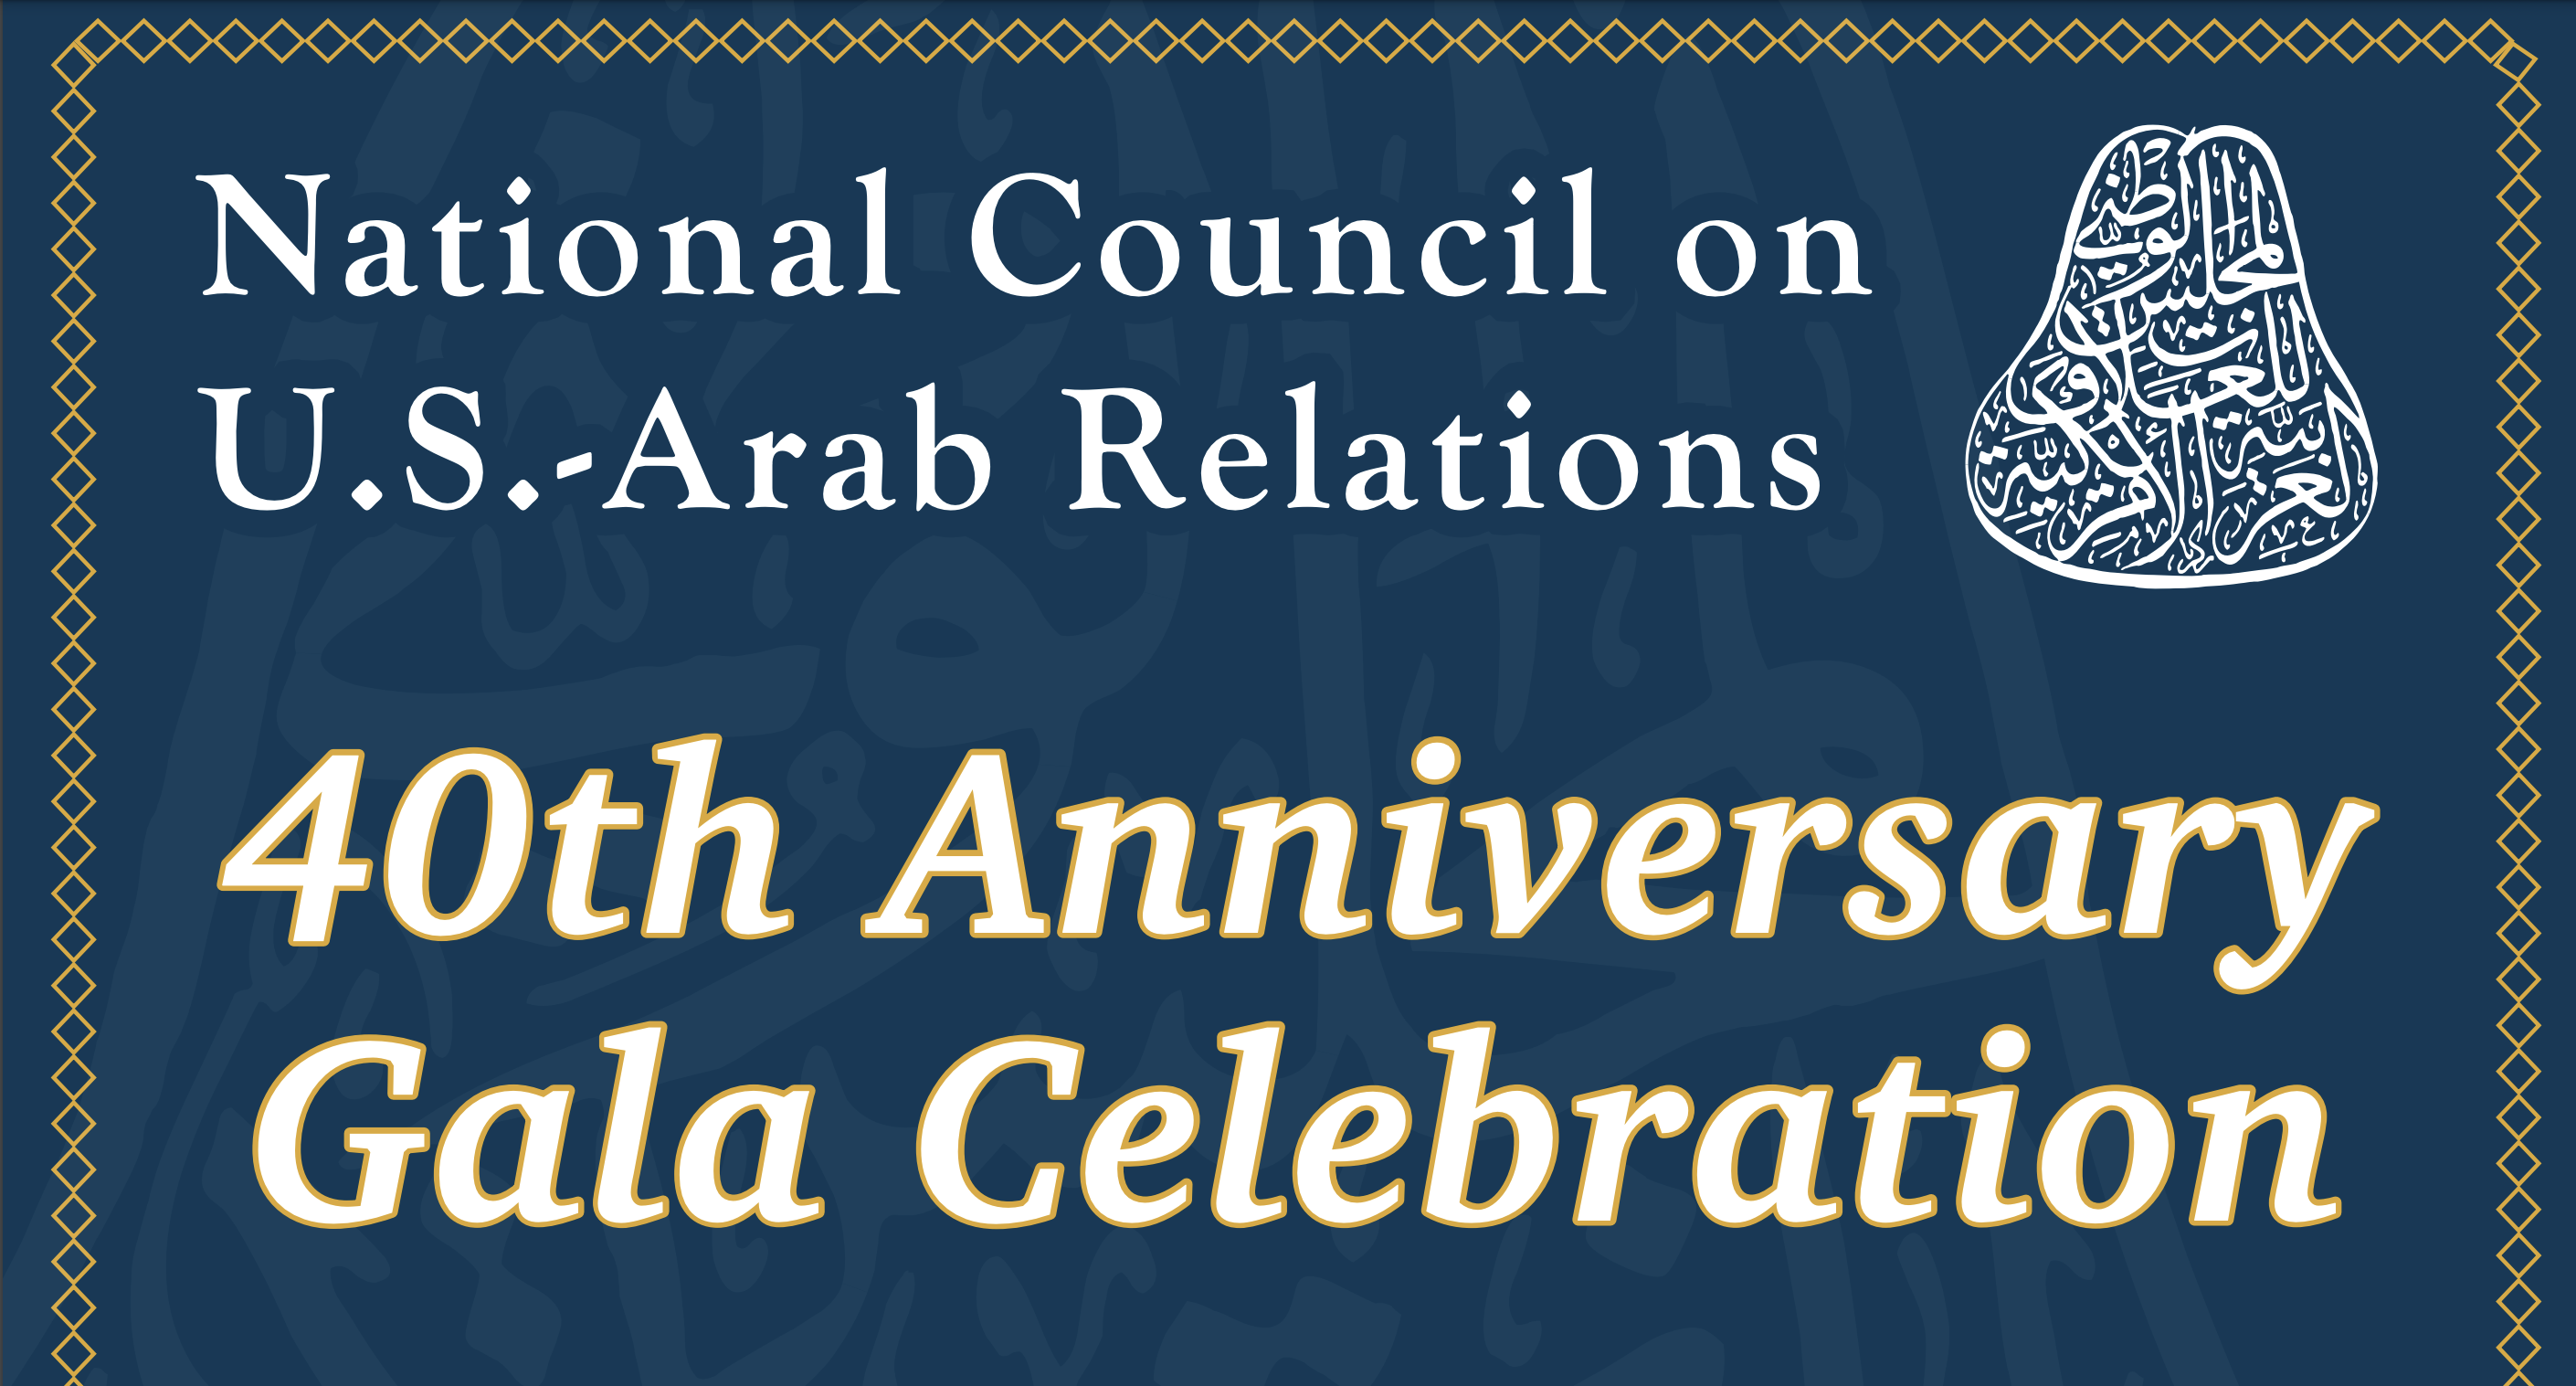 40th Annual National Council on U.S. Arab Relations